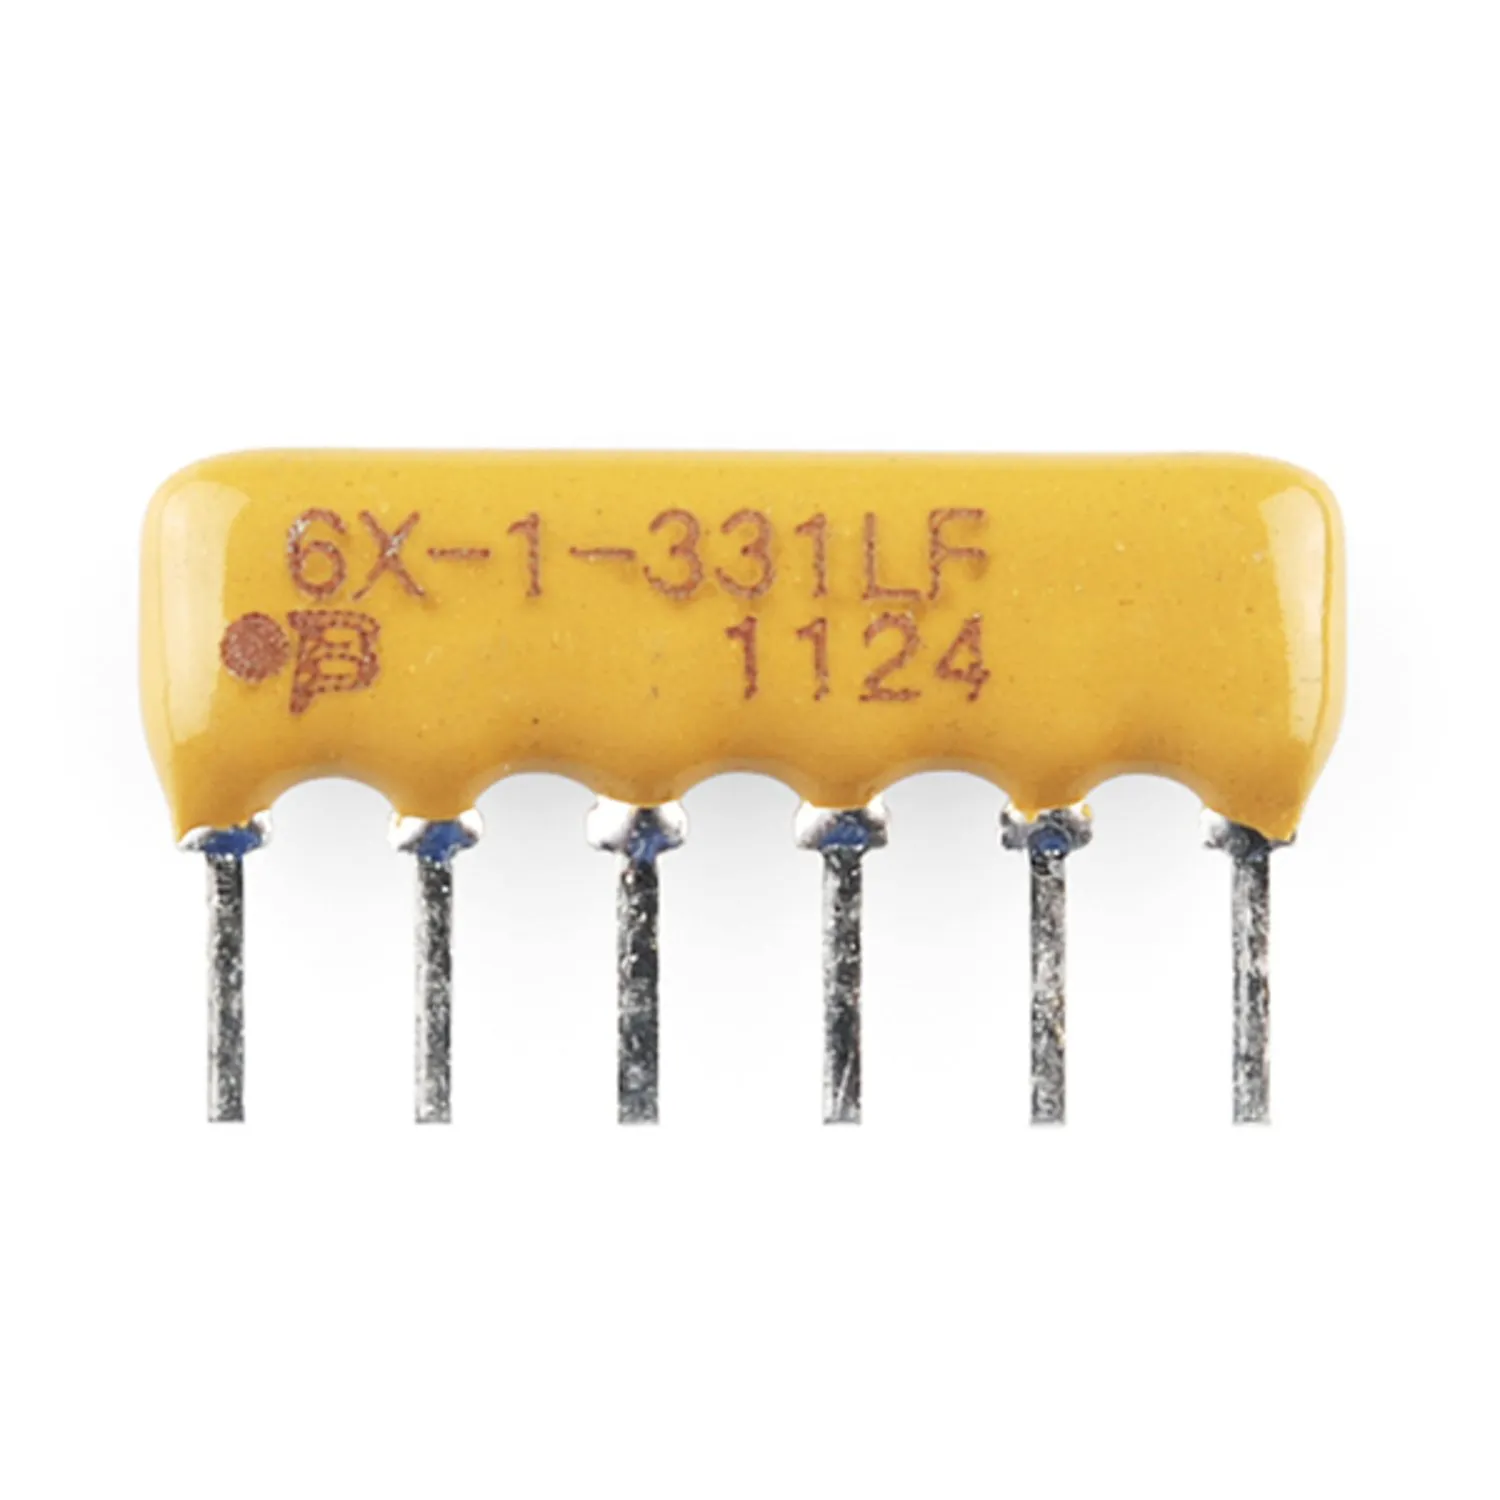 Photo of Resistor Network - 330 Ohm (6-pin bussed)